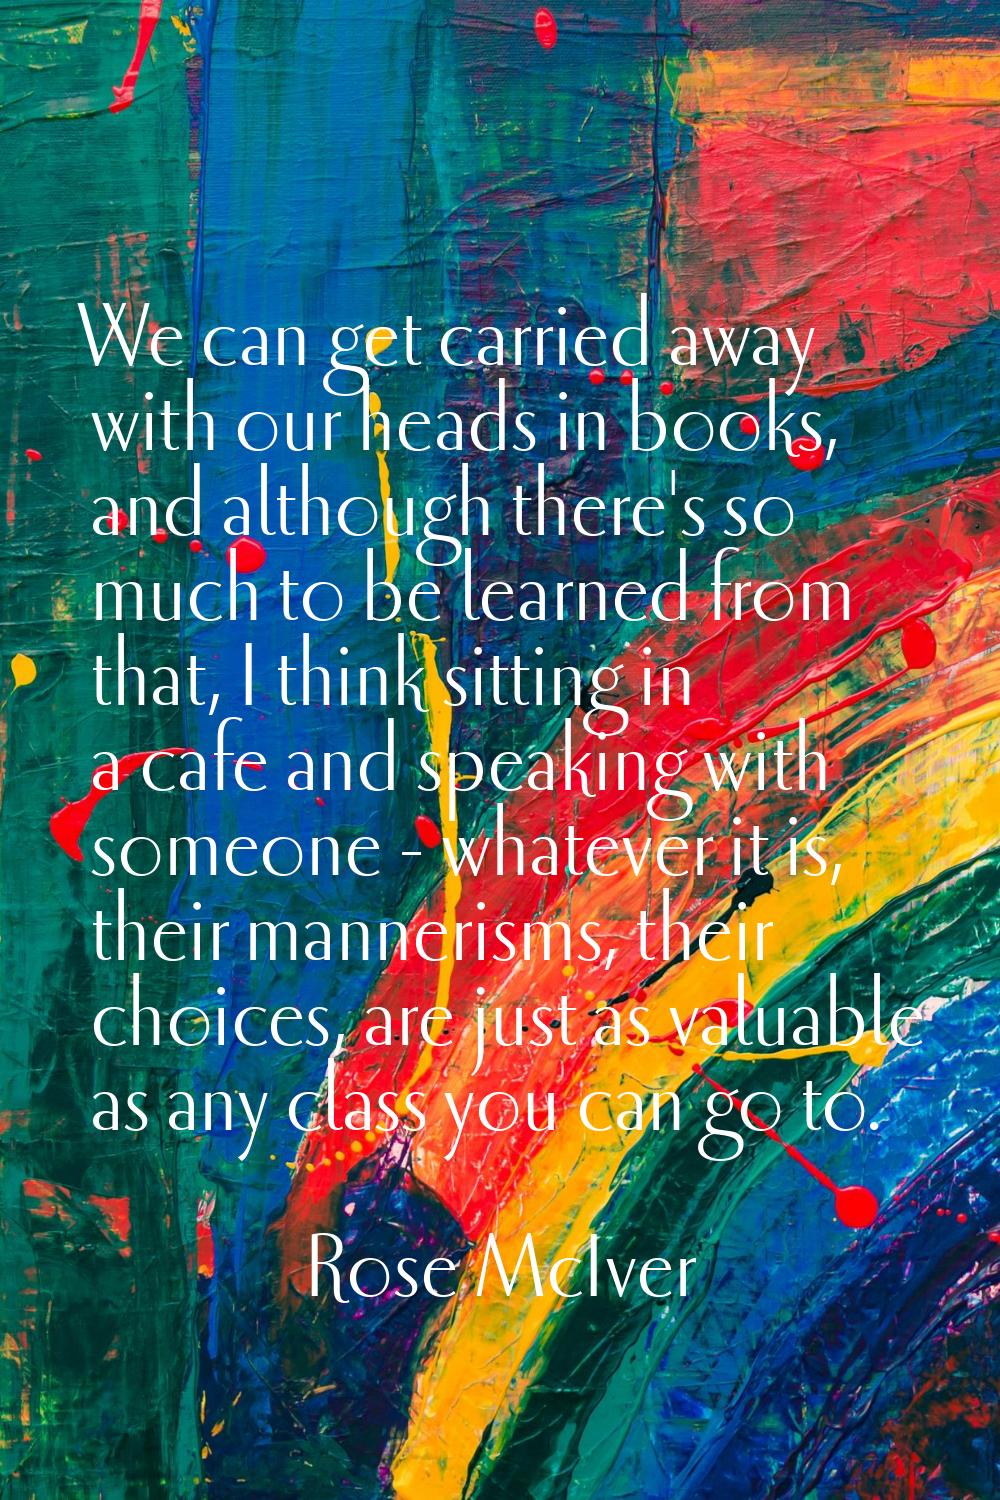 We can get carried away with our heads in books, and although there's so much to be learned from th